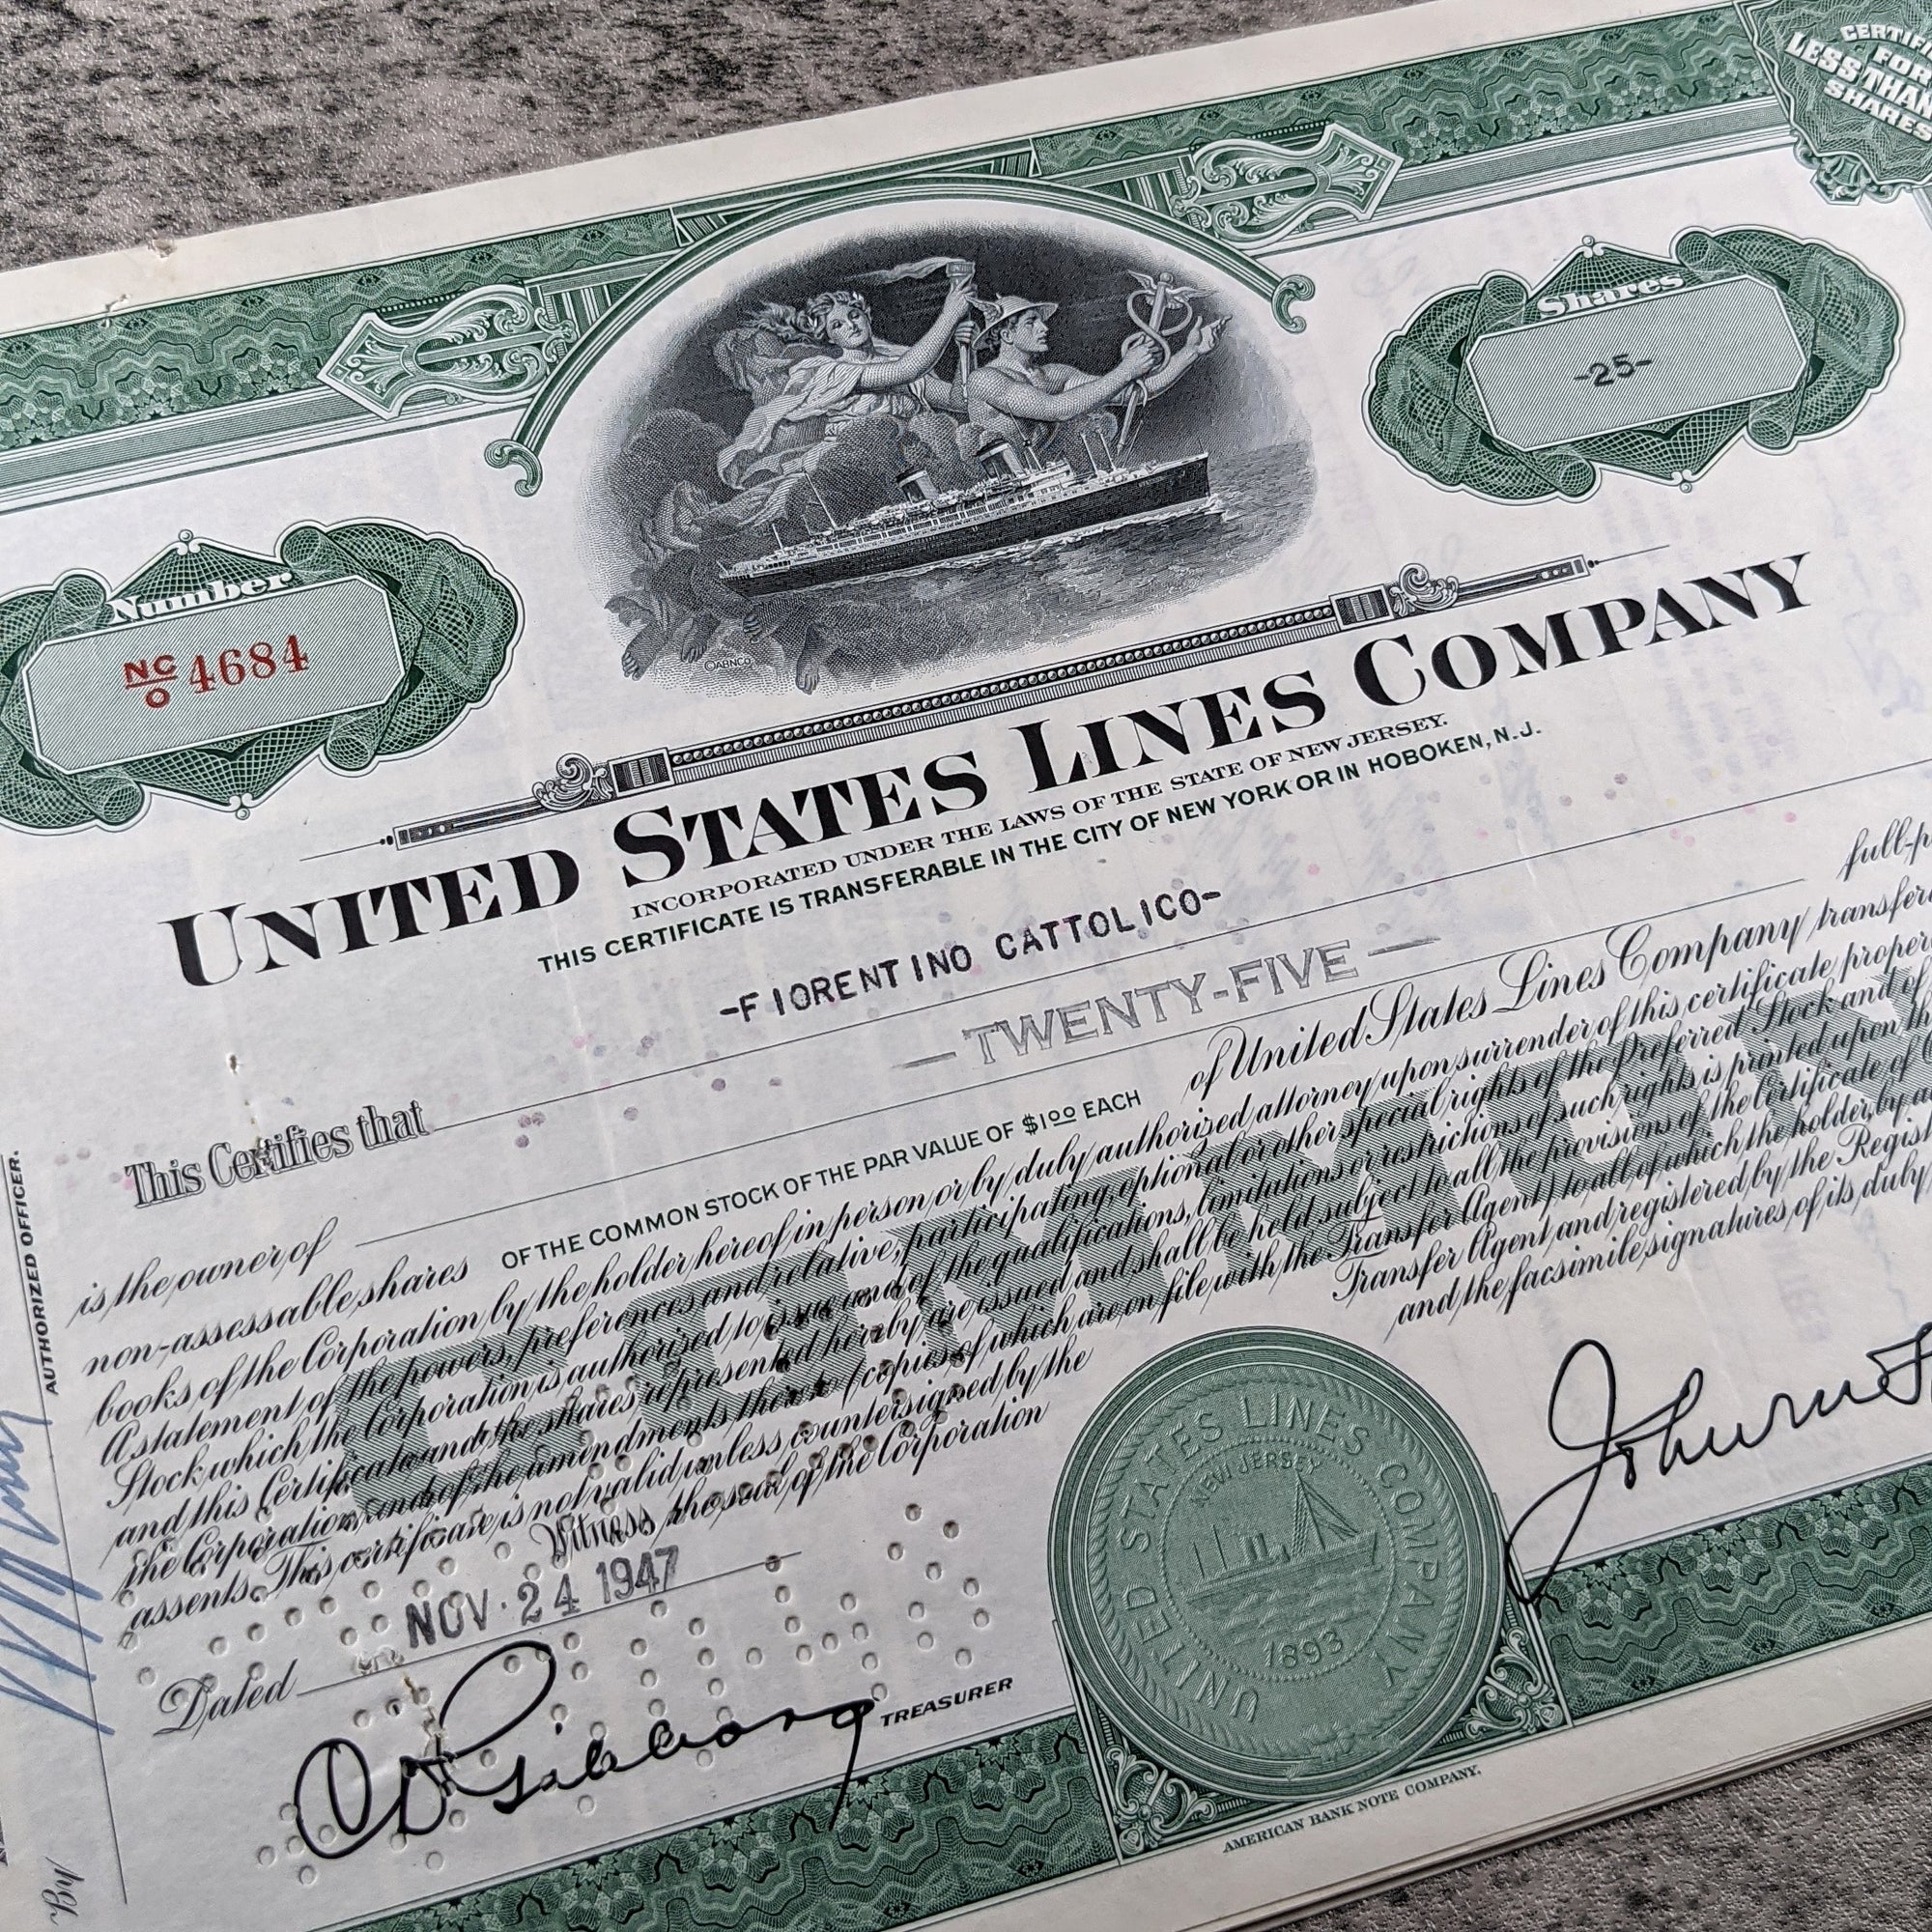 United States Lines Company Stock Certificate - 1940's - Passenger Ships